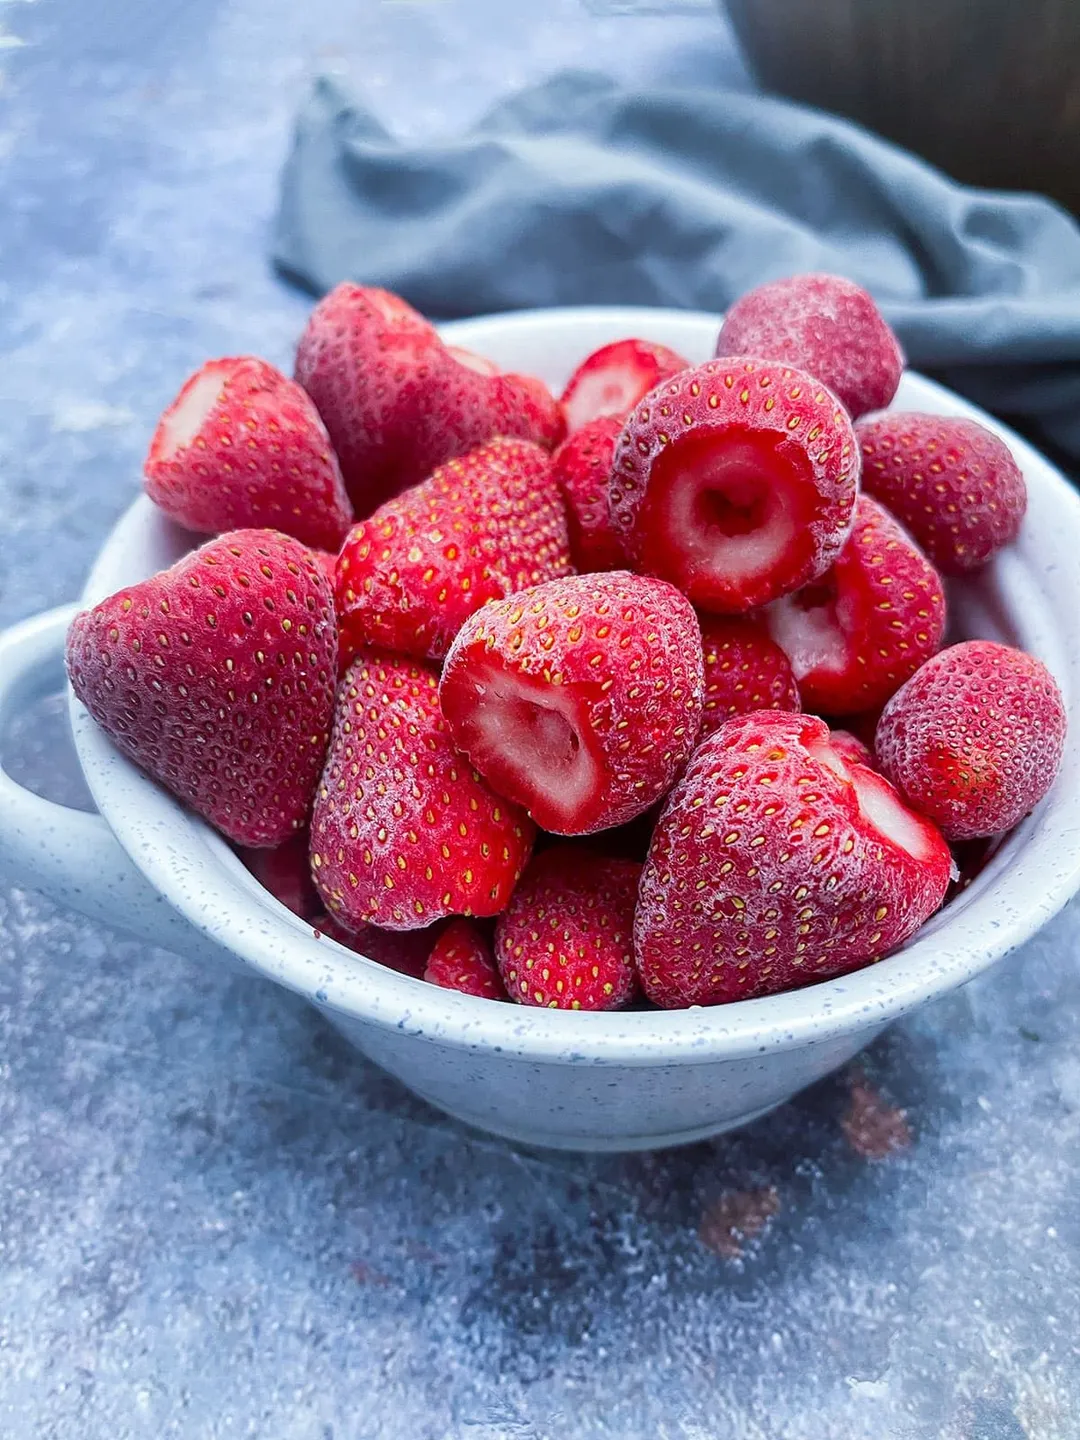 A bowl of hulled strawberries